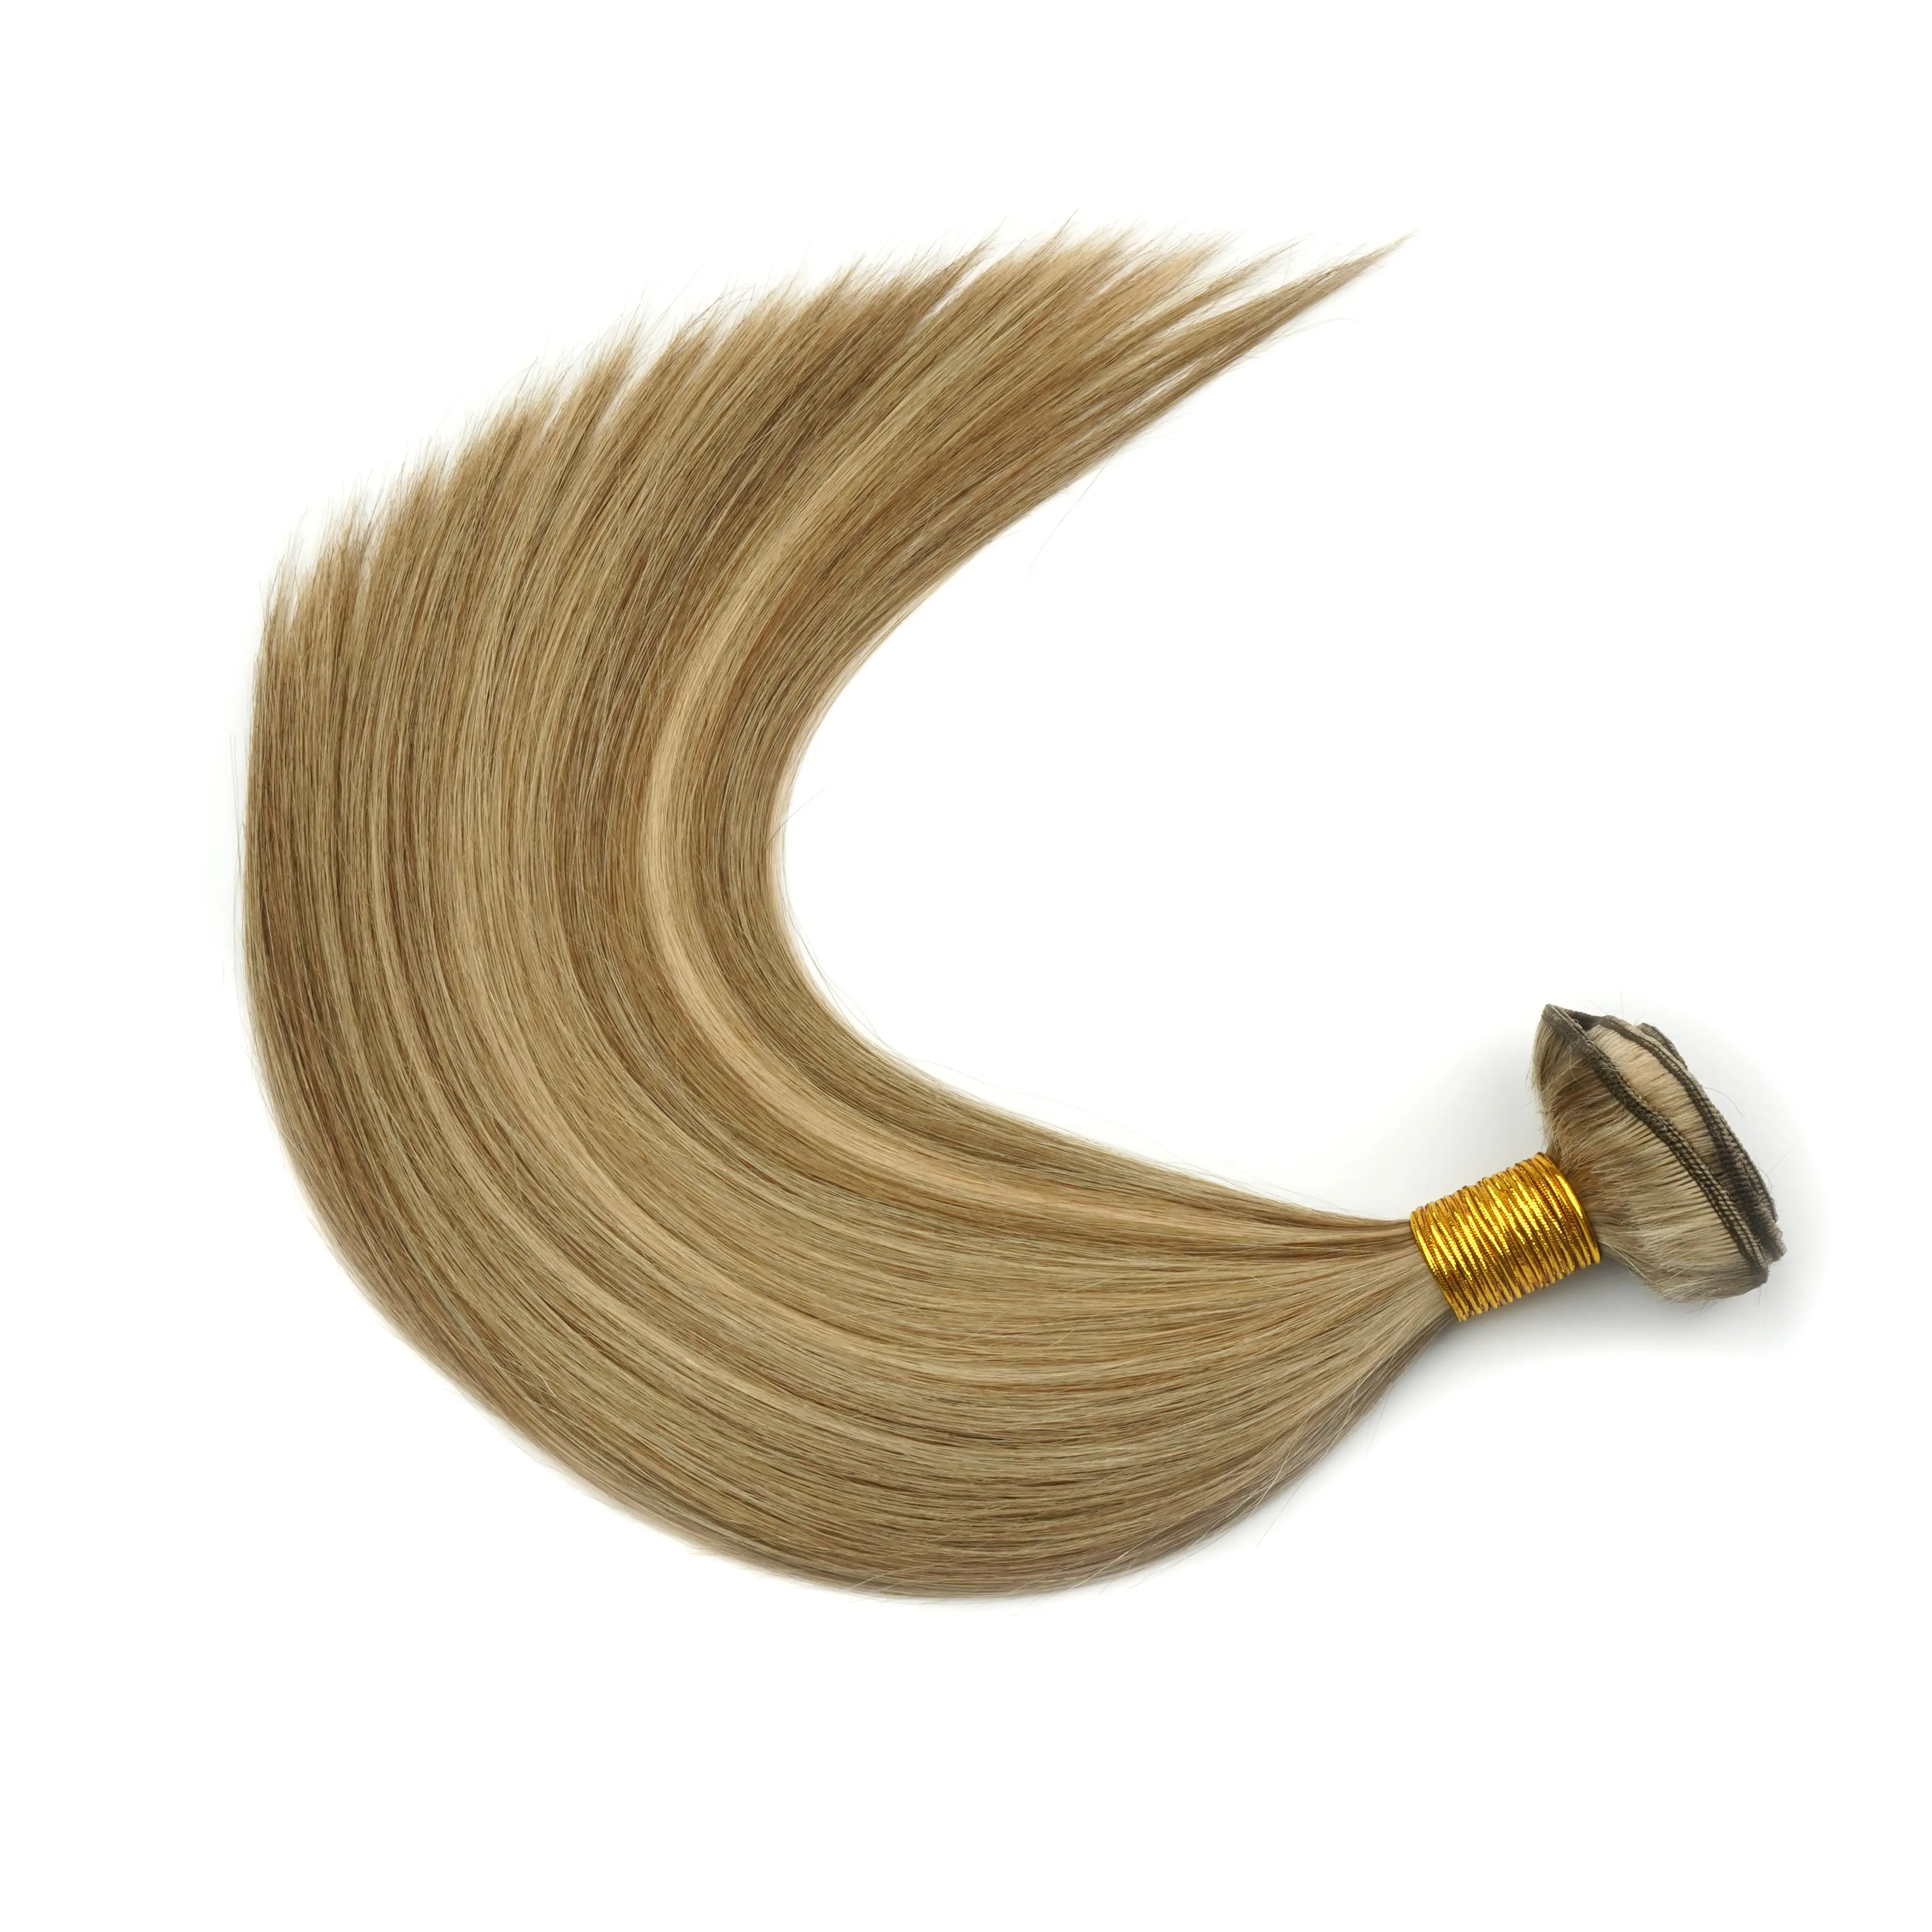 Original European Best Quality Double Drawn Russian Remy Human Hair Weft Virgin Cuticle Aligned Weft Hair Extensions